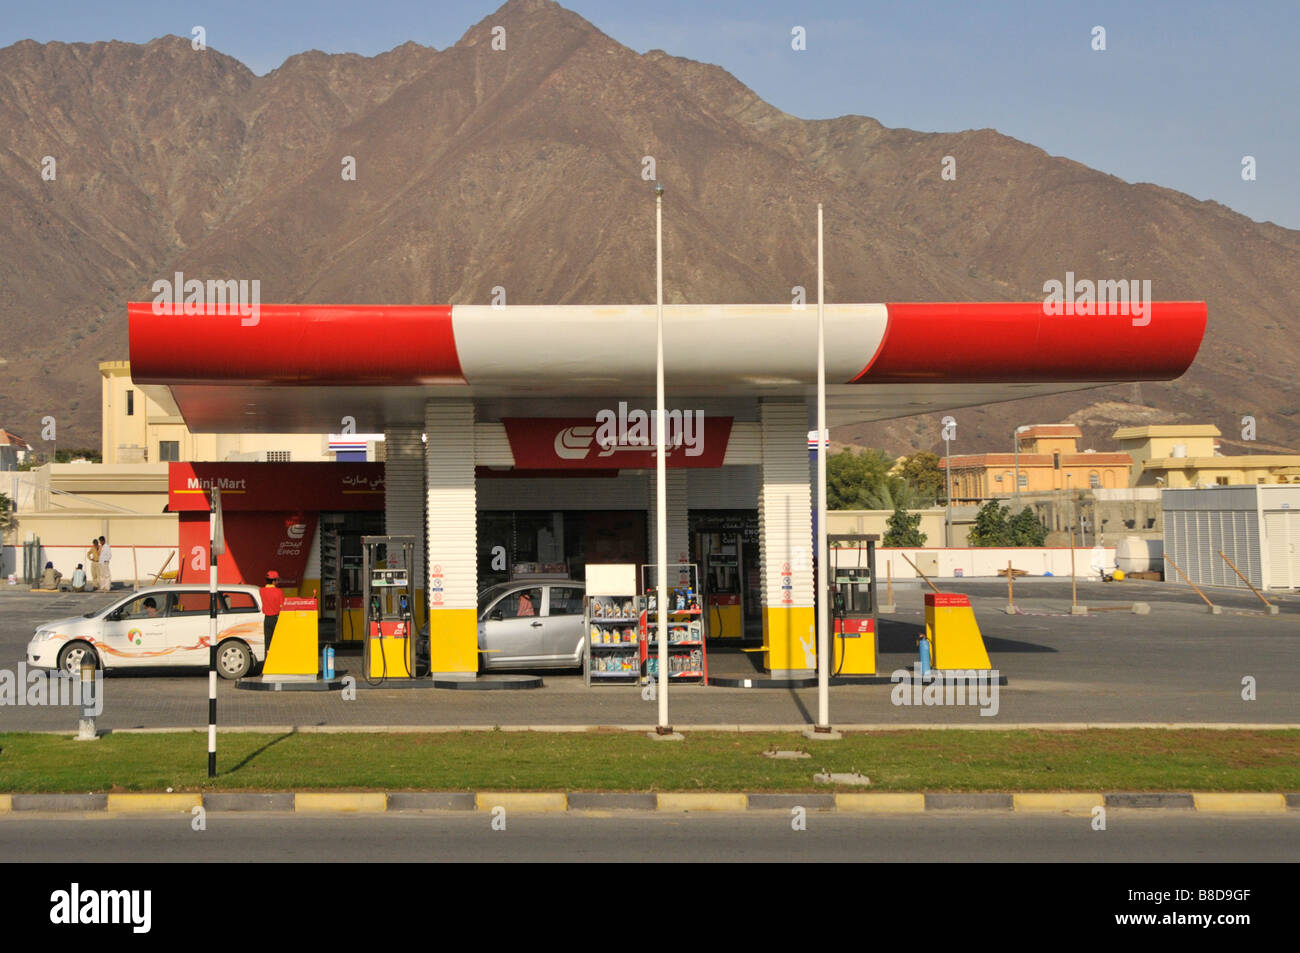 The emirate of Fujairah on the Gulf of Oman one of the United Arab emirates, typical modern out of town petrol filling station Stock Photo